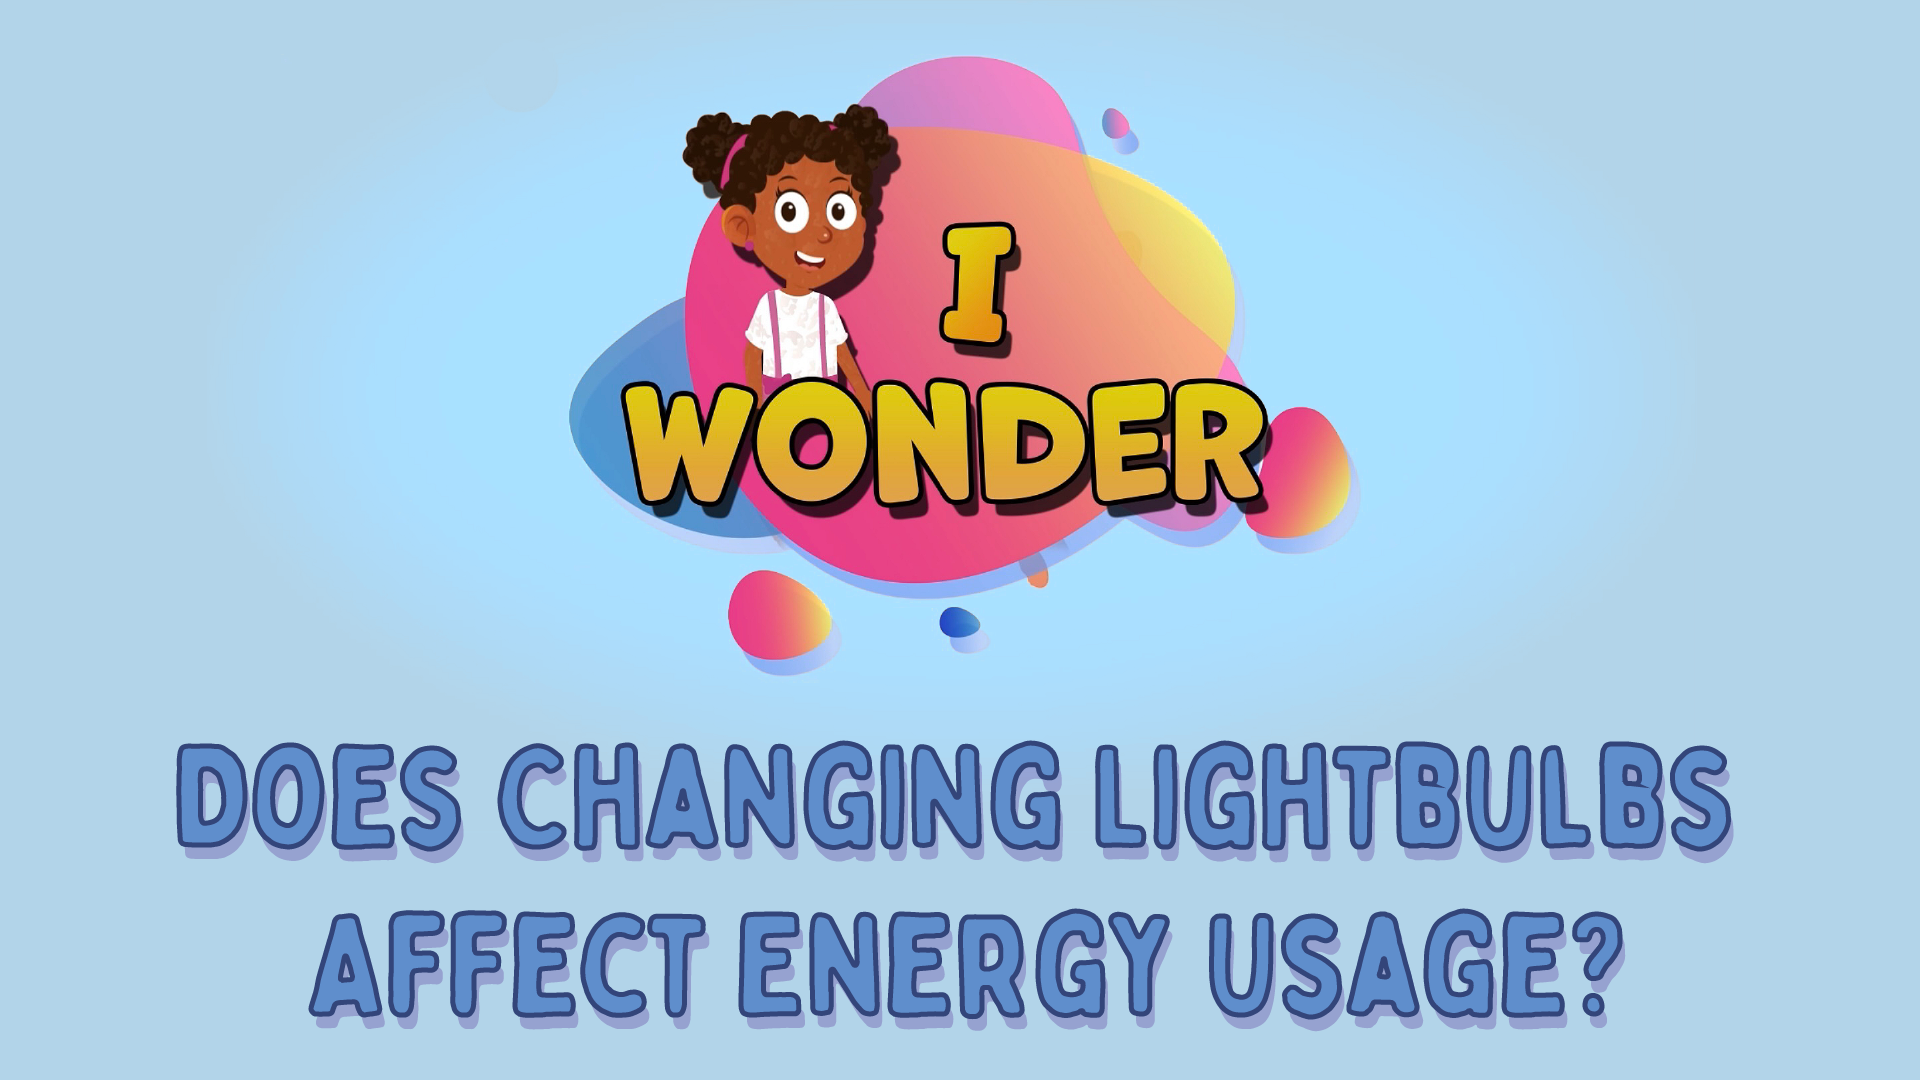 Does Changing Lightbulbs Affect Energy Usage?